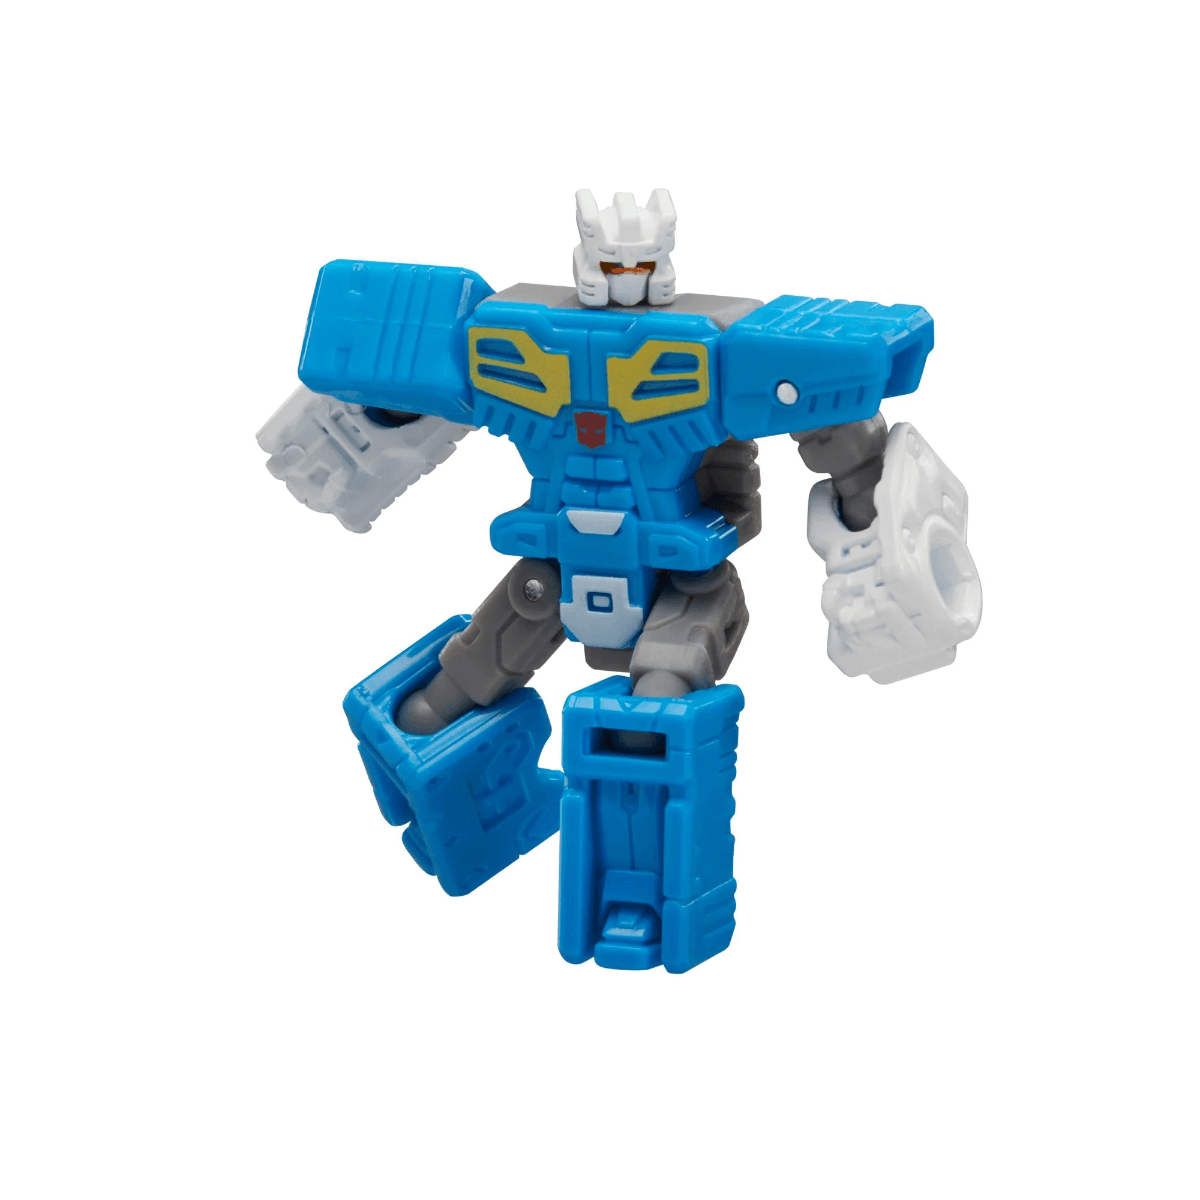 26504 Transformers Studio Series Voyager: The Movie 86-25 Autobot Blaster & Eject - Hasbro - Titan Pop Culture